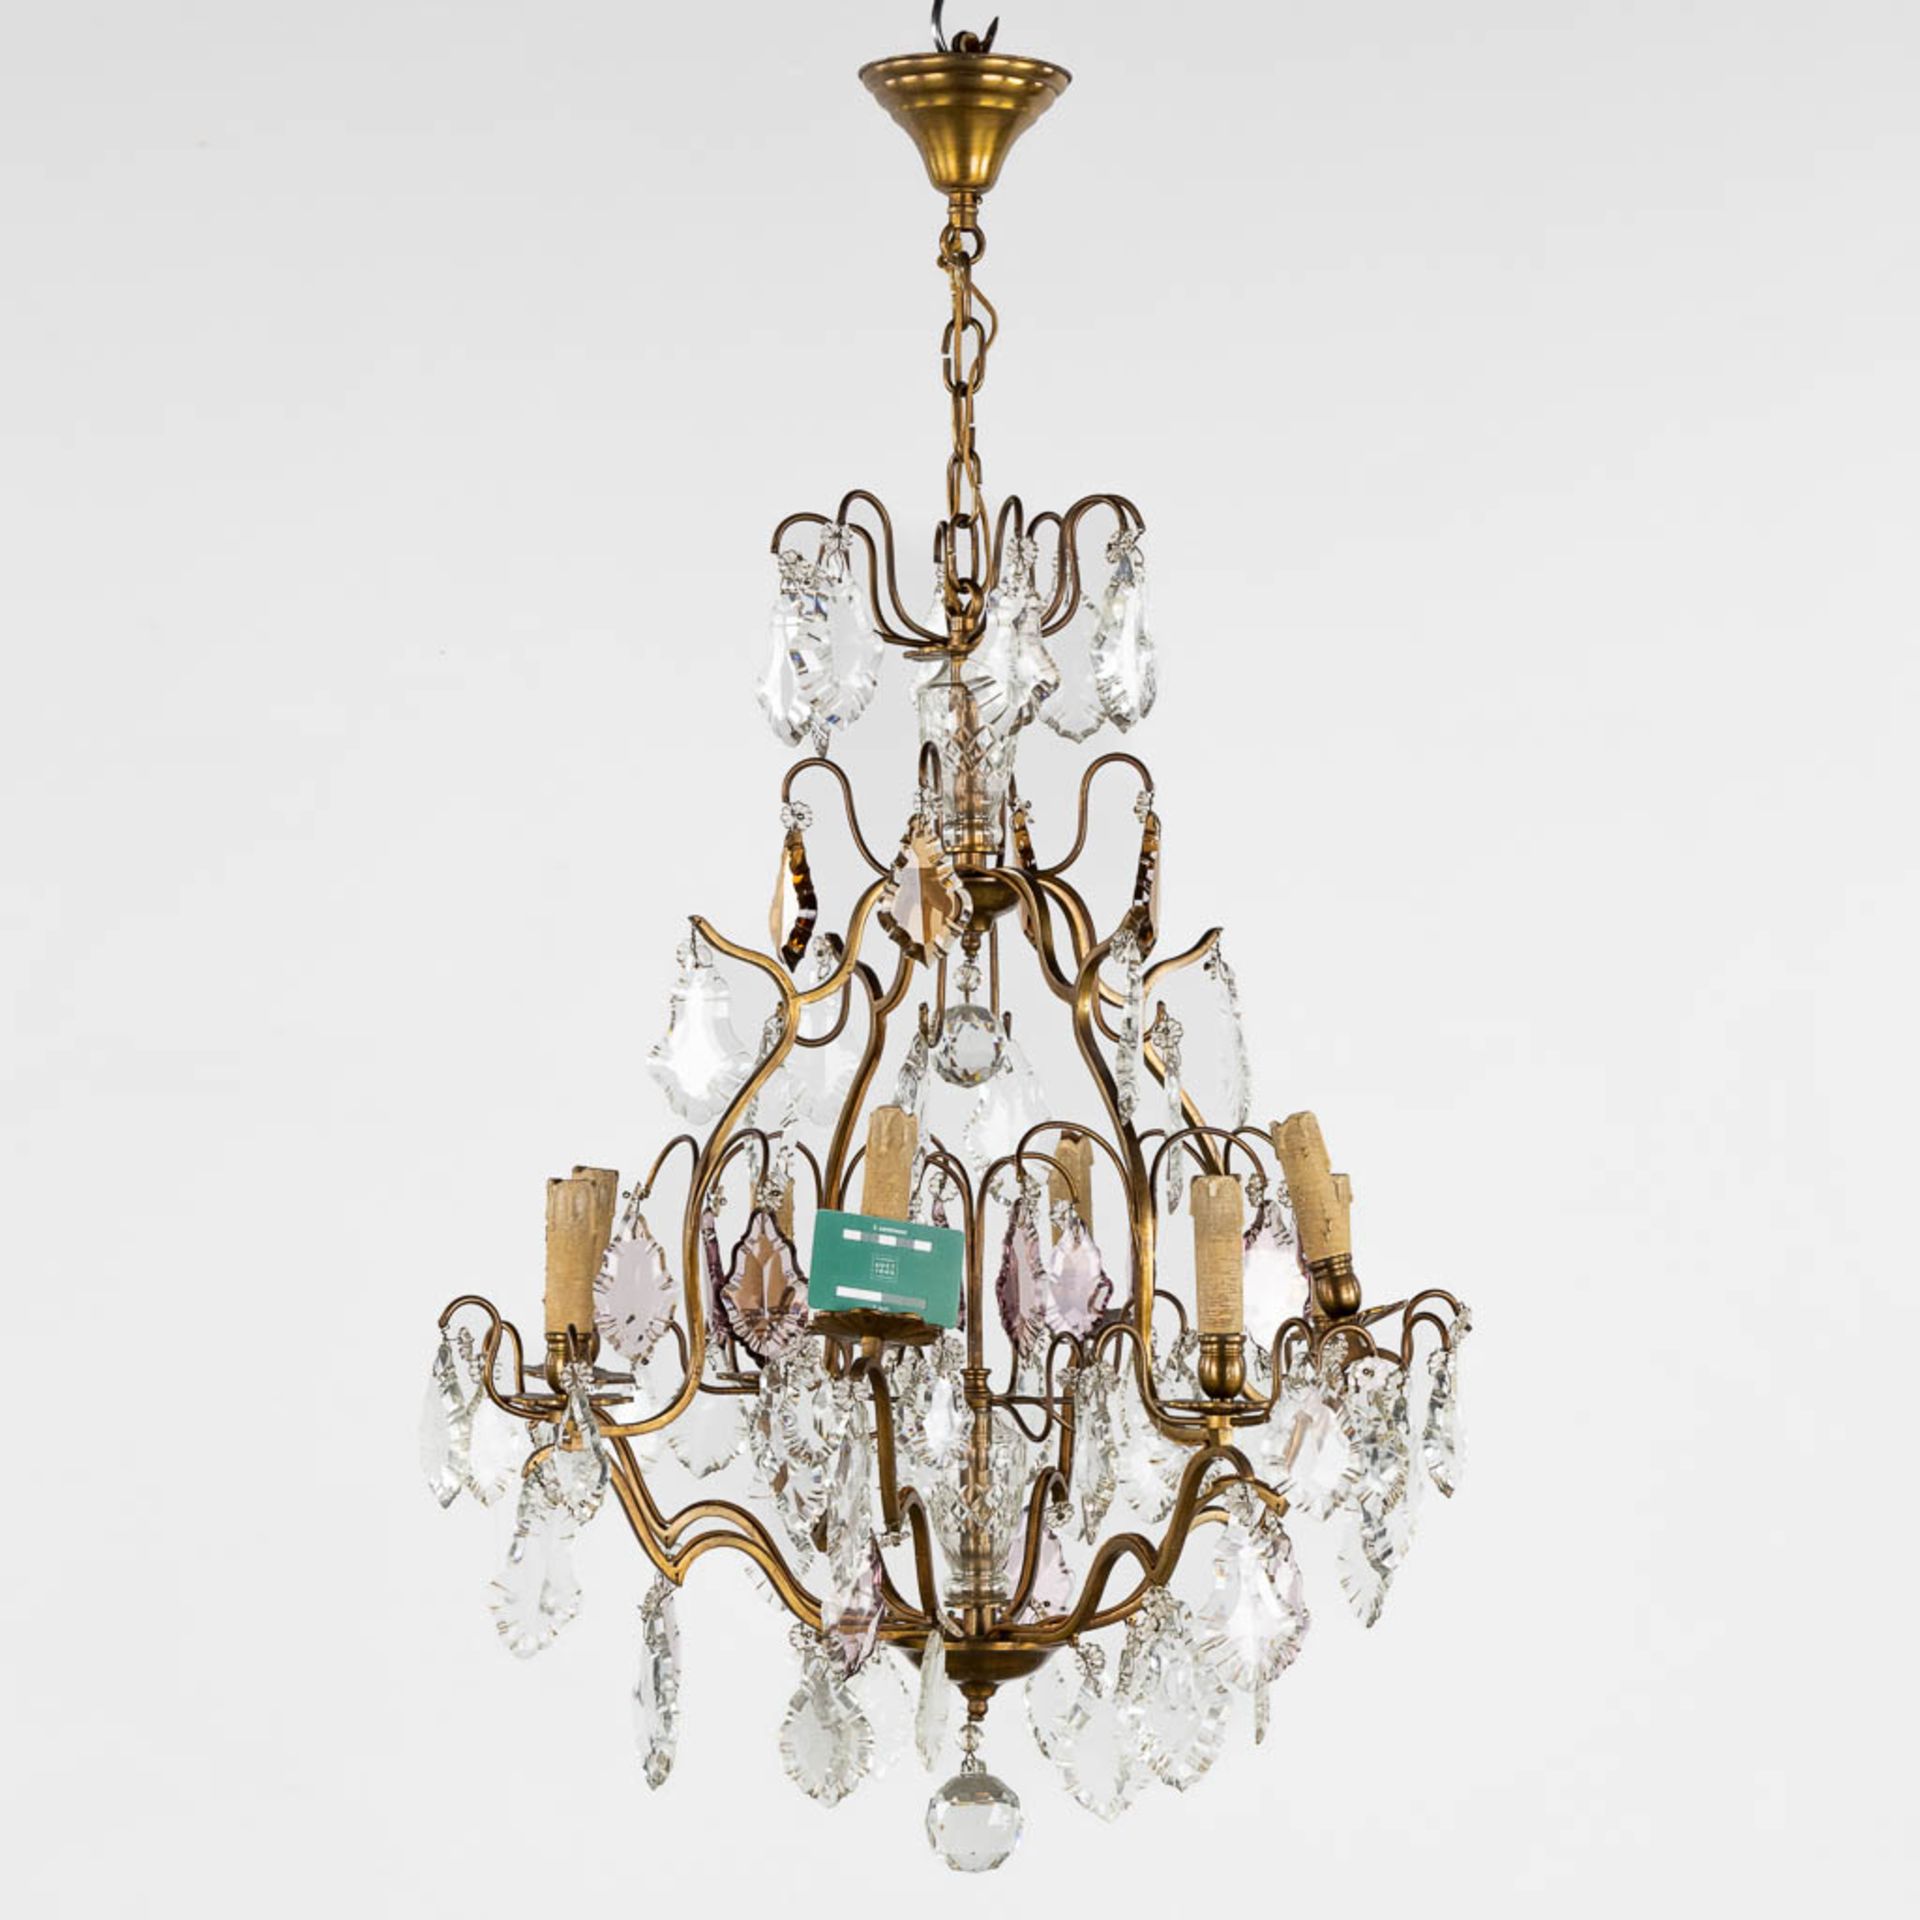 An antique chandelier, brass with coloured and white glass. Circa 1930. (H:80 x D:68 cm) - Image 2 of 11